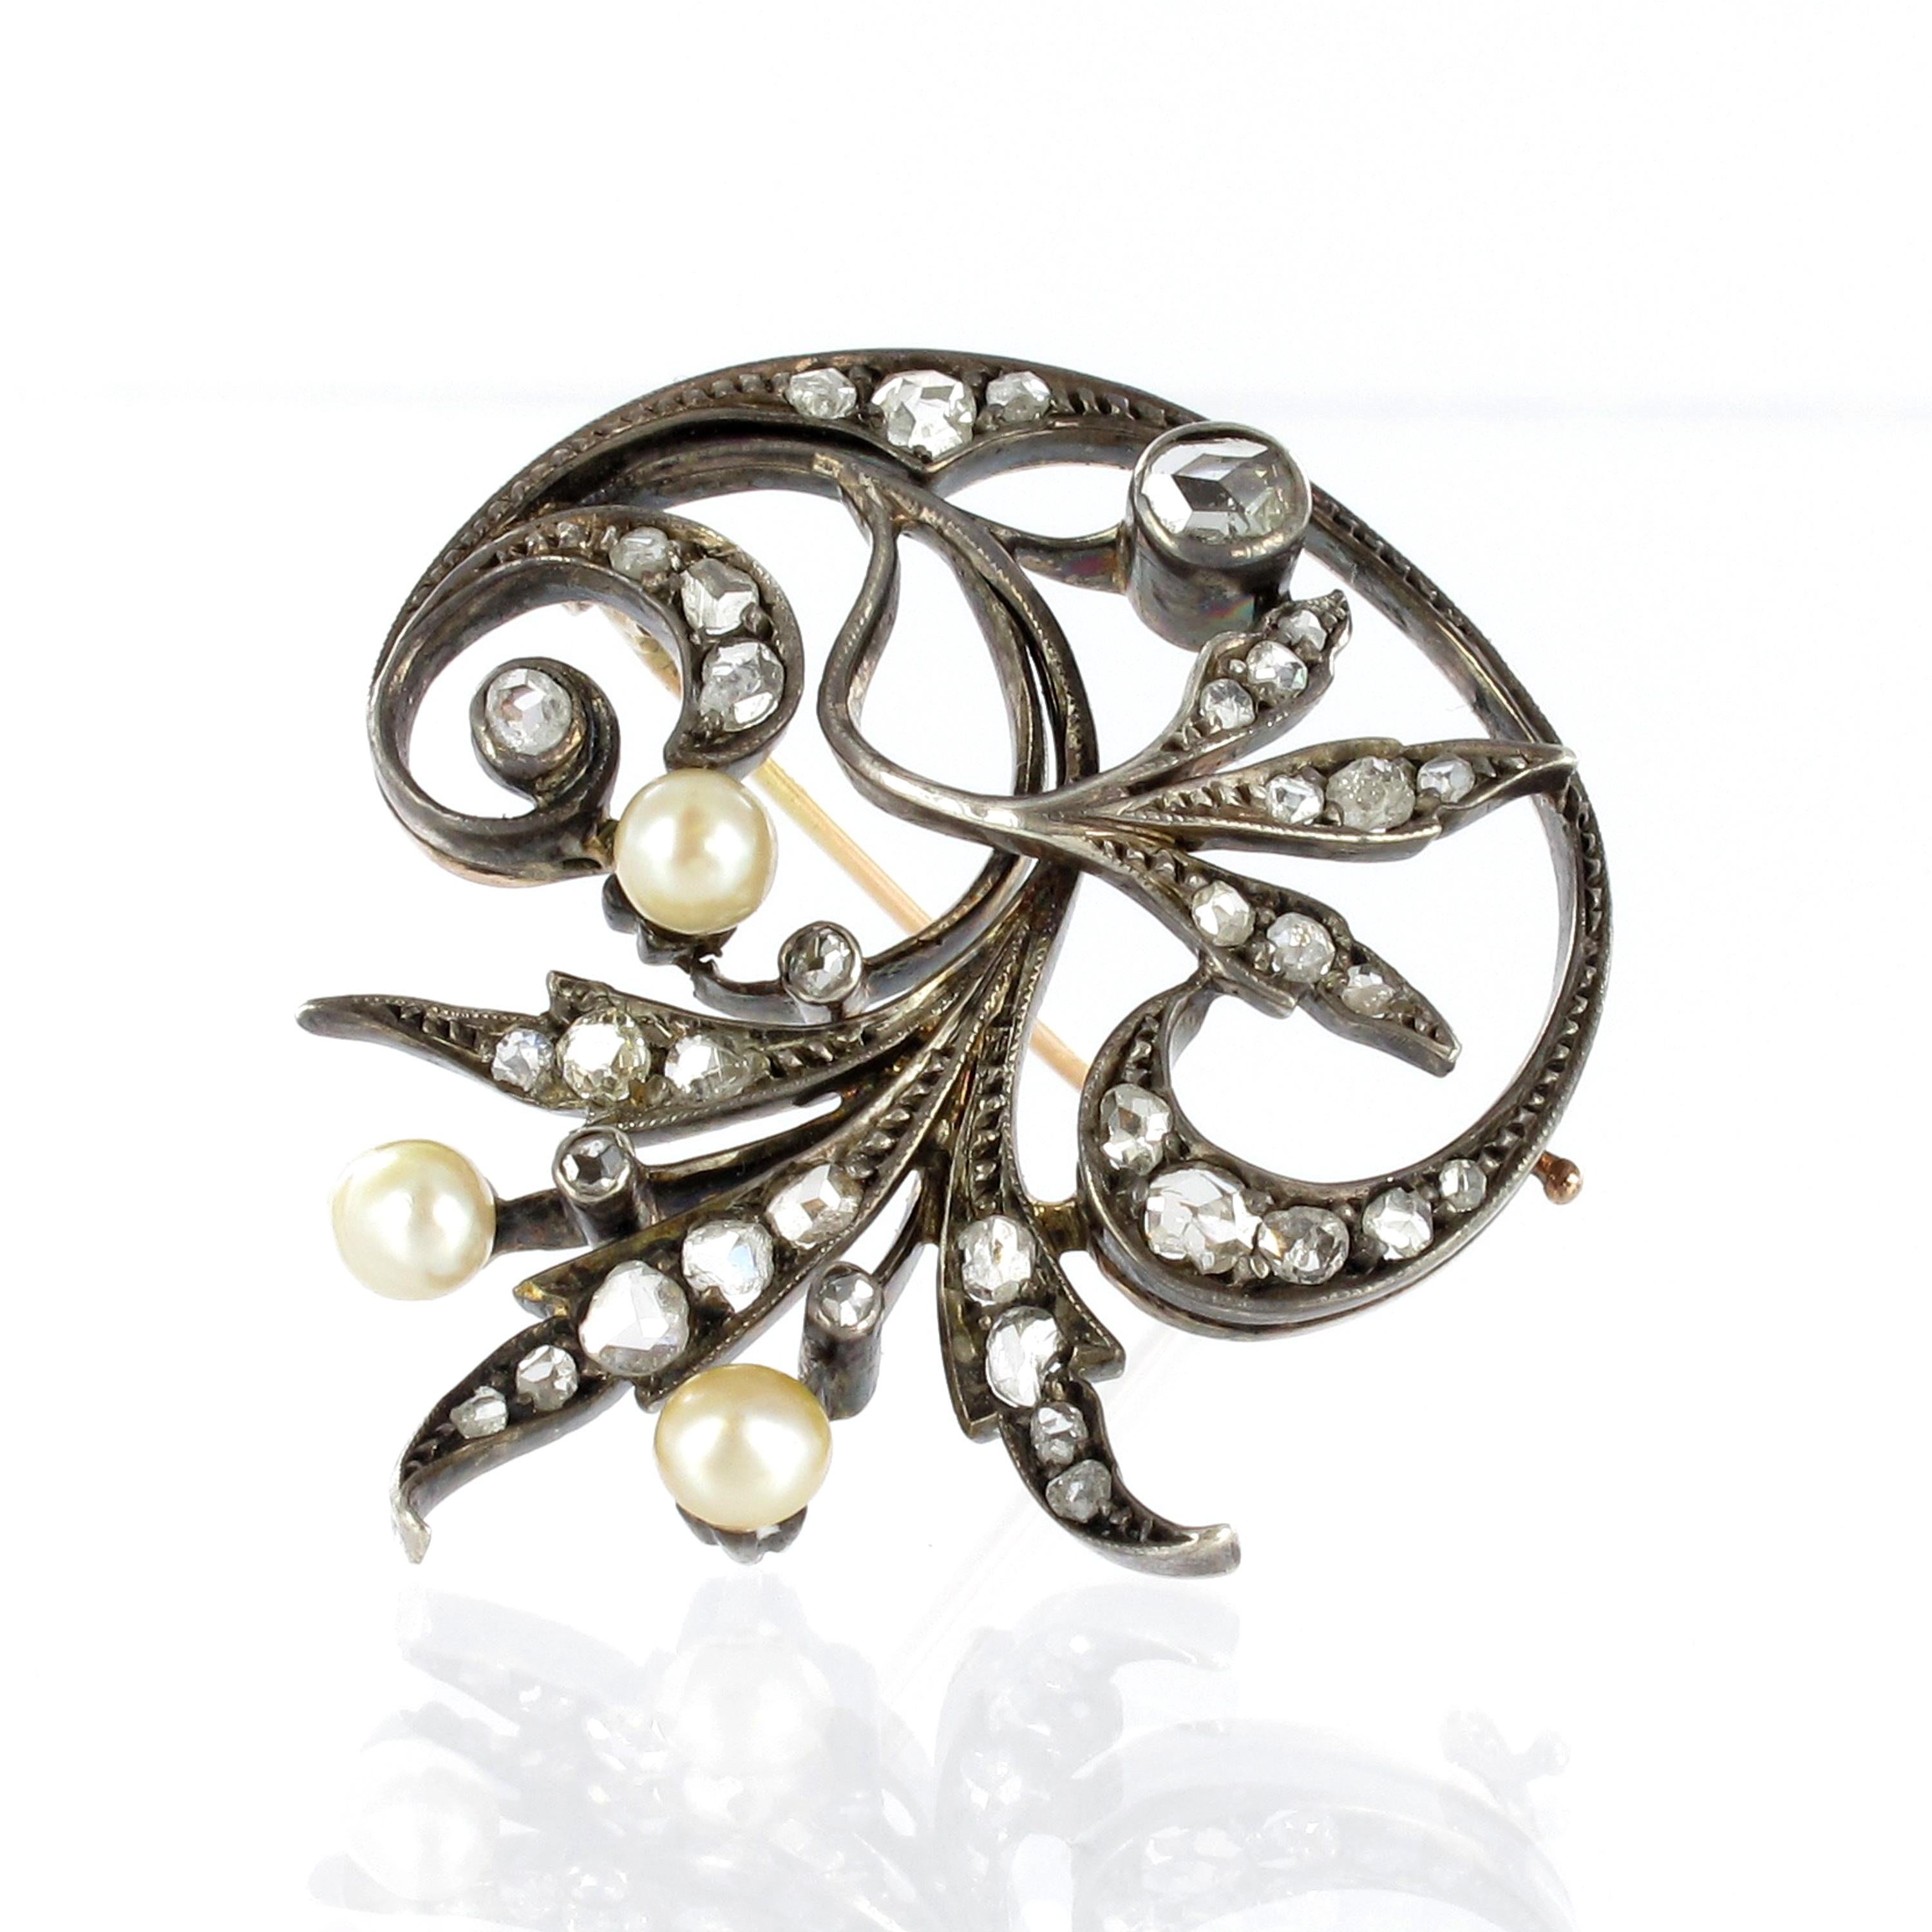 Victorian floral brooch in silver on 18K rose gold. The lovely brooch is set with three small natural pearls of   mm in size and 33 rose cut diamonds totalling approximate 0.75 ct.

Brooch system in 18K rose gold.

Dimensions: 35 x 30 mm / 1.38 x